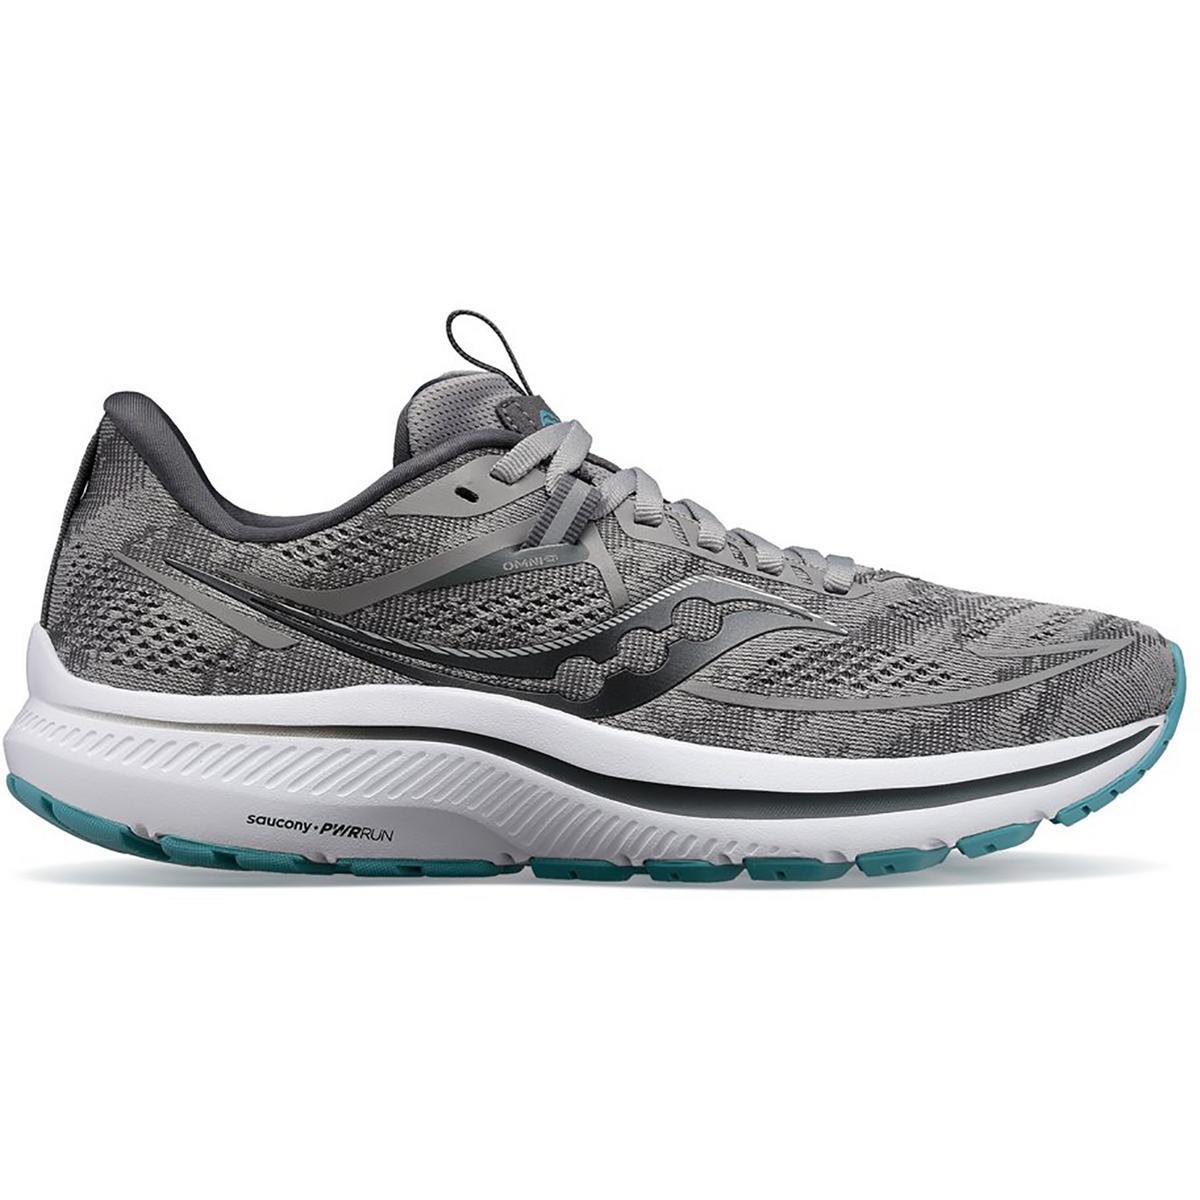 Saucony Womens Omni 21 Fitness Running Training Shoes Sneakers Bhfo 3256 Alloy/Rainfall